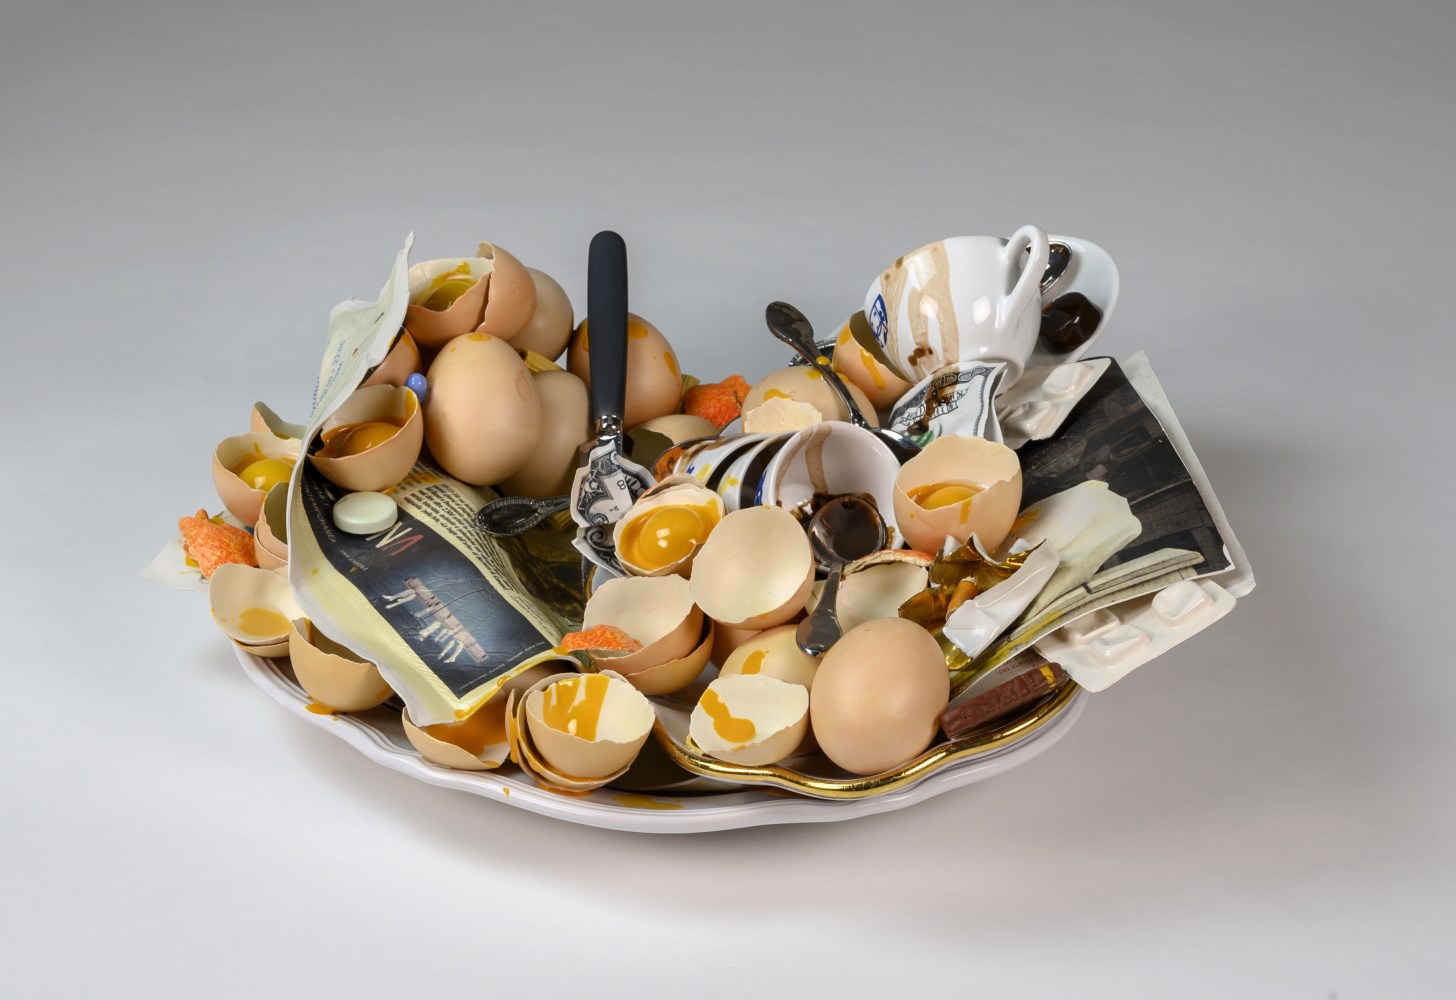 A cermic tray holding a number of broken eggshells and their yolks, piled messily amongst a page from a publication, crumpled dollar bills, and coffee-stained espresso cups and spoons